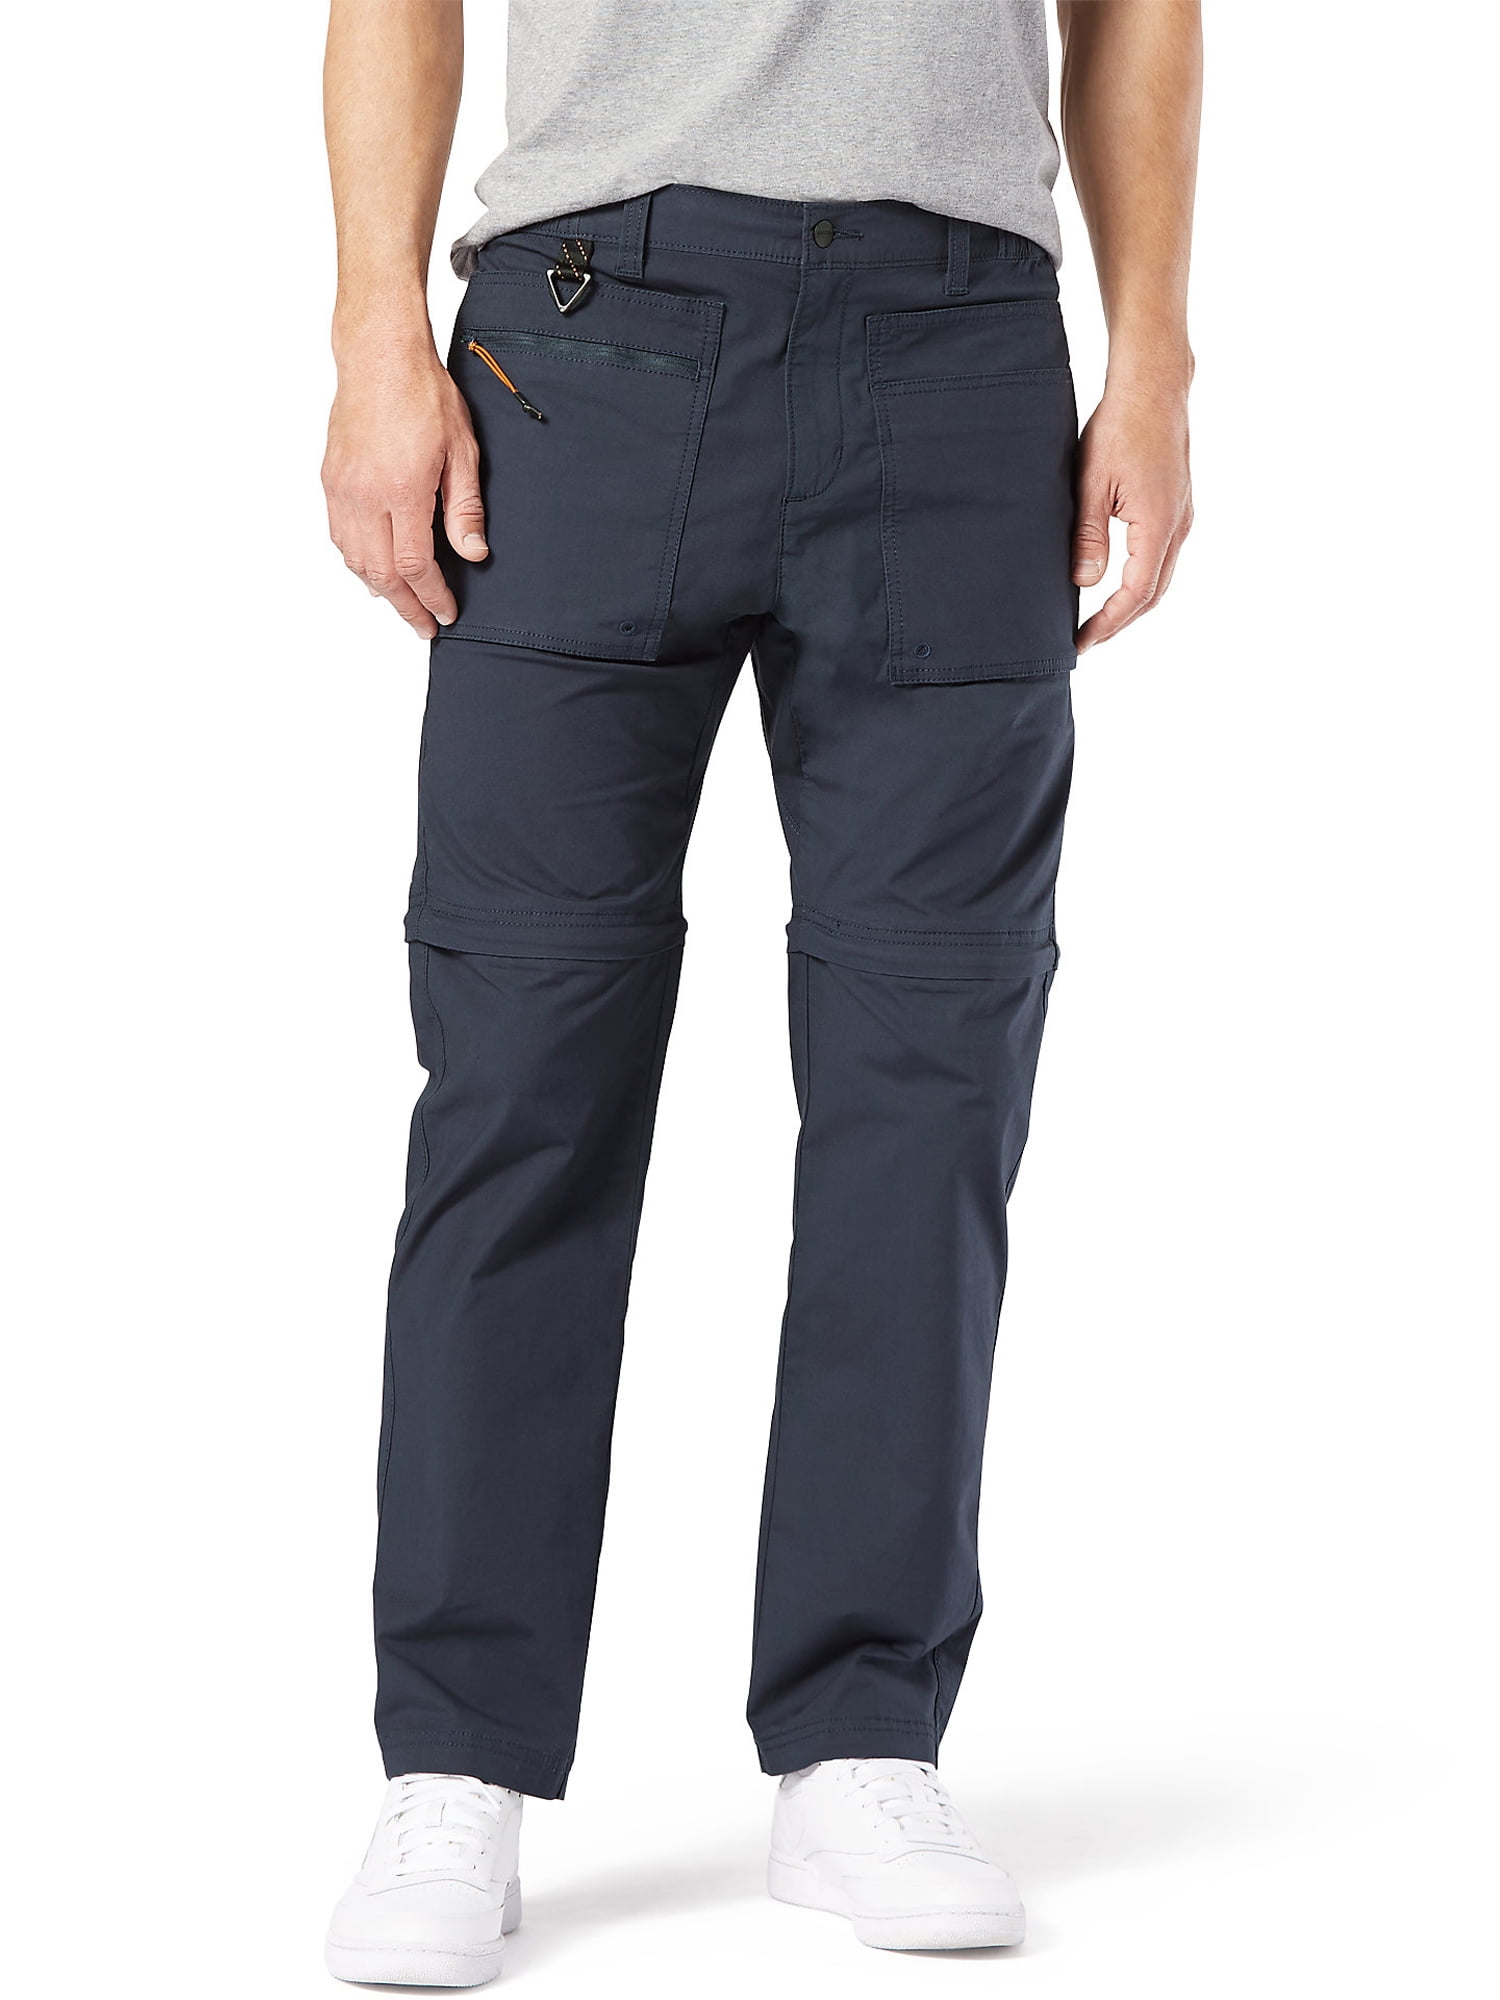 Magellan Outdoors Mens Back Country 20 ZipOff Pants  Academy